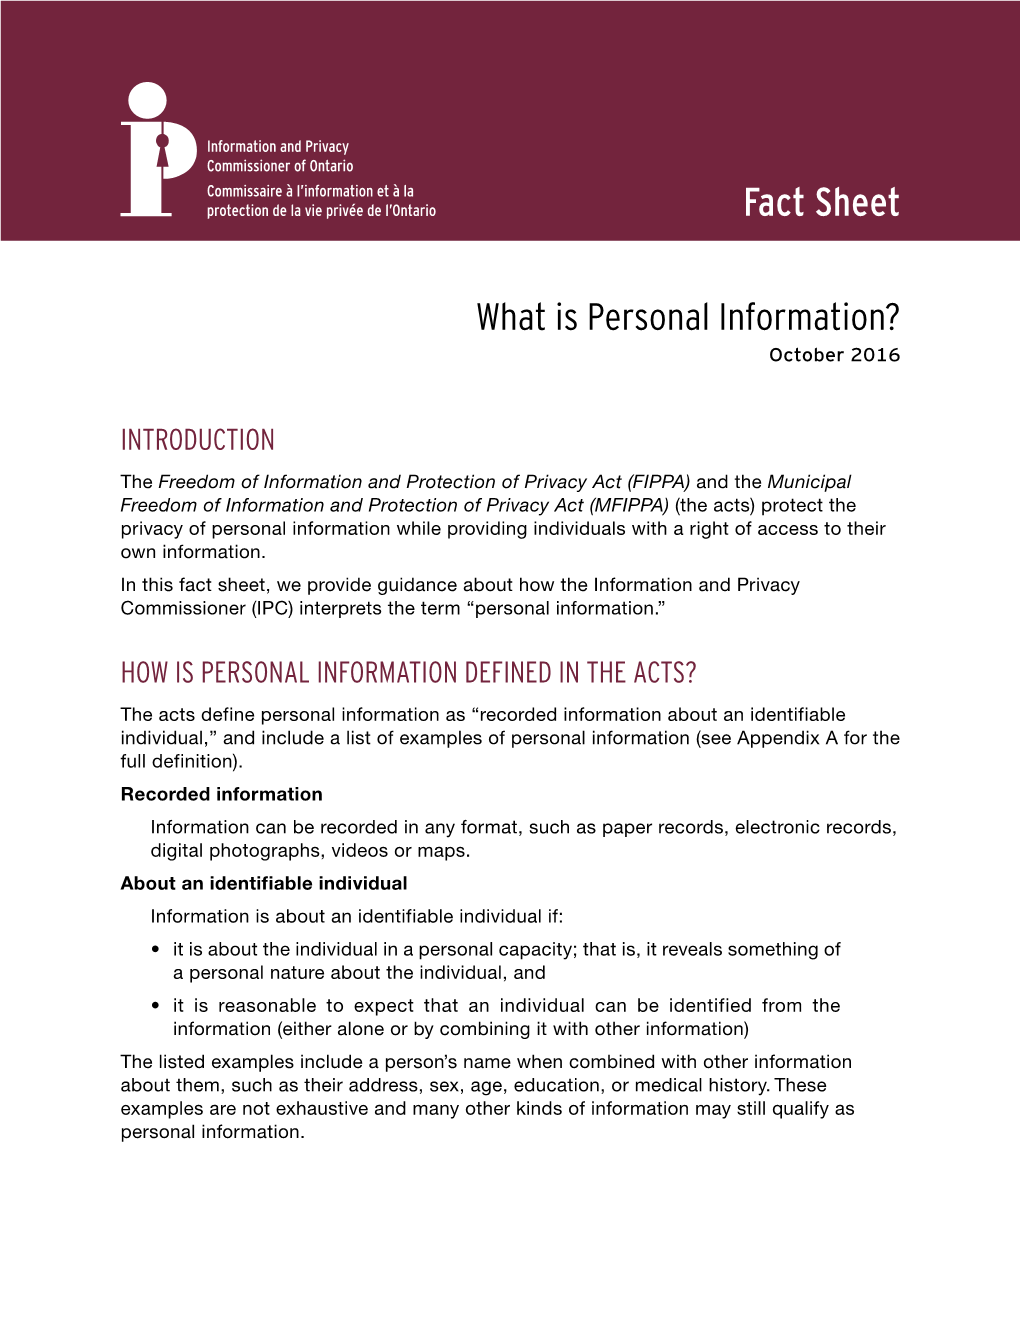 Fact Sheet: What Is Personal Information? 2